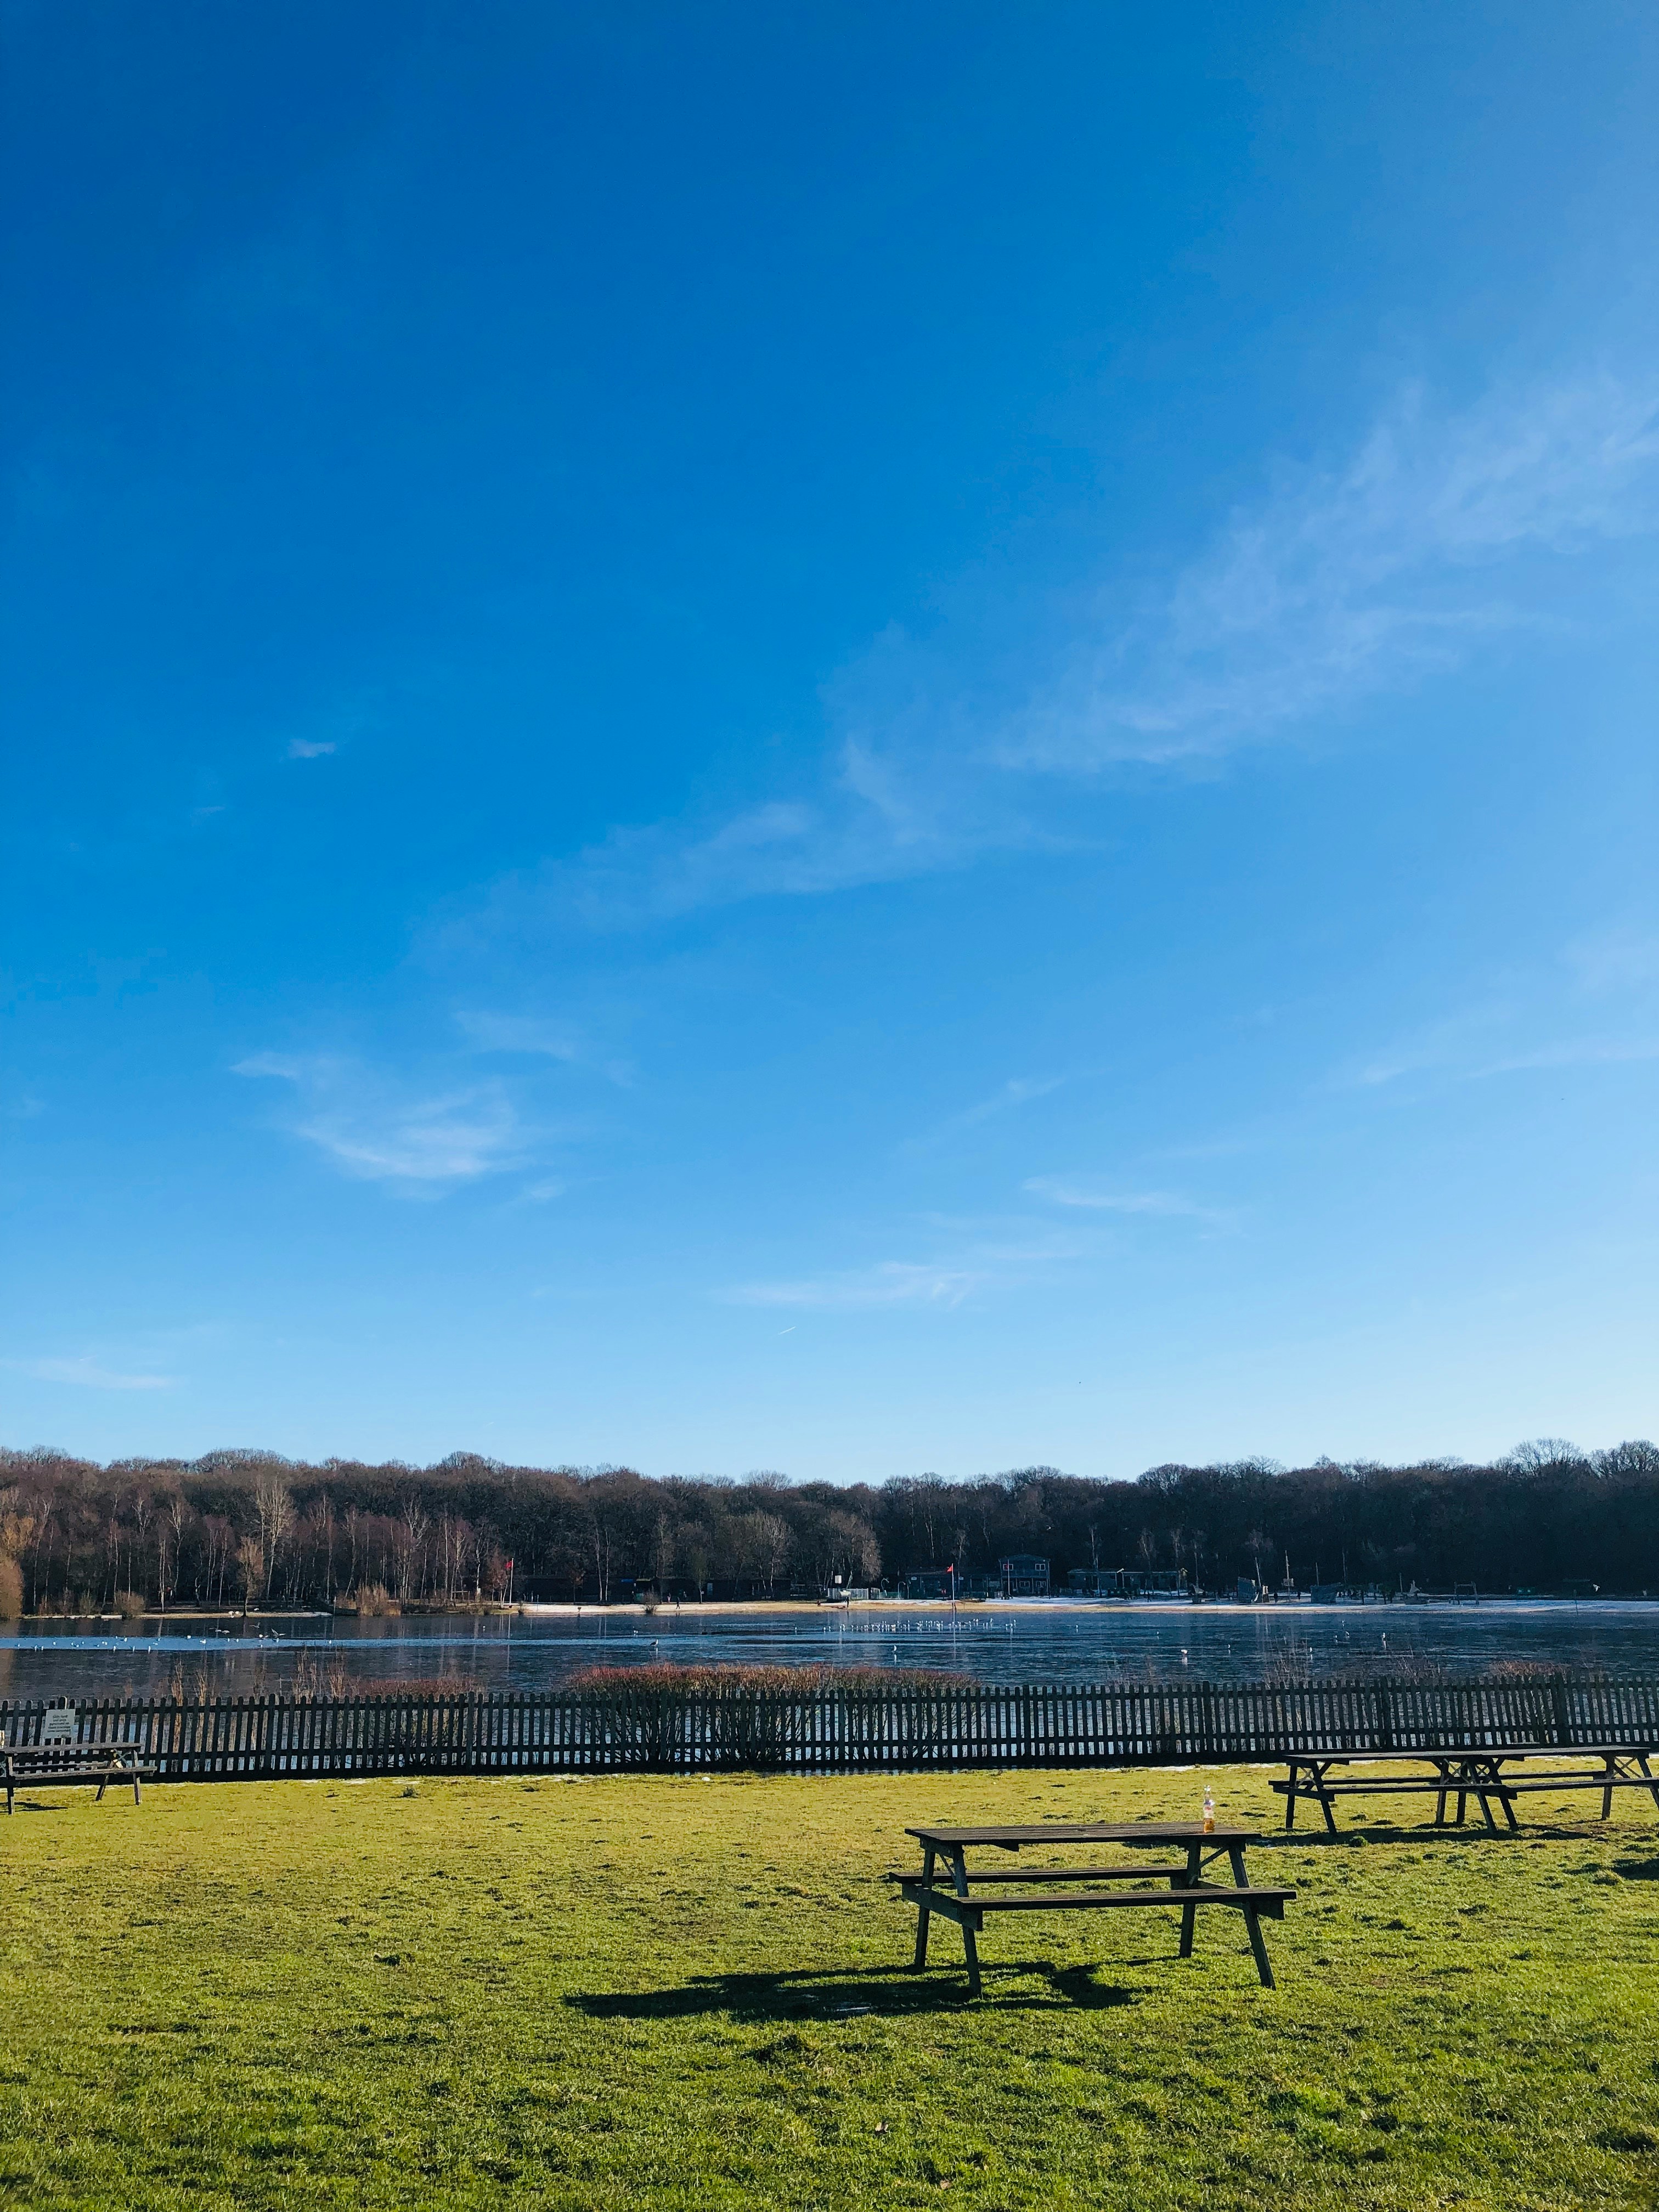 : empty benches facing a body of water with blue skies above - a quiet scene at Ruislip Lido in Hillingdon UK